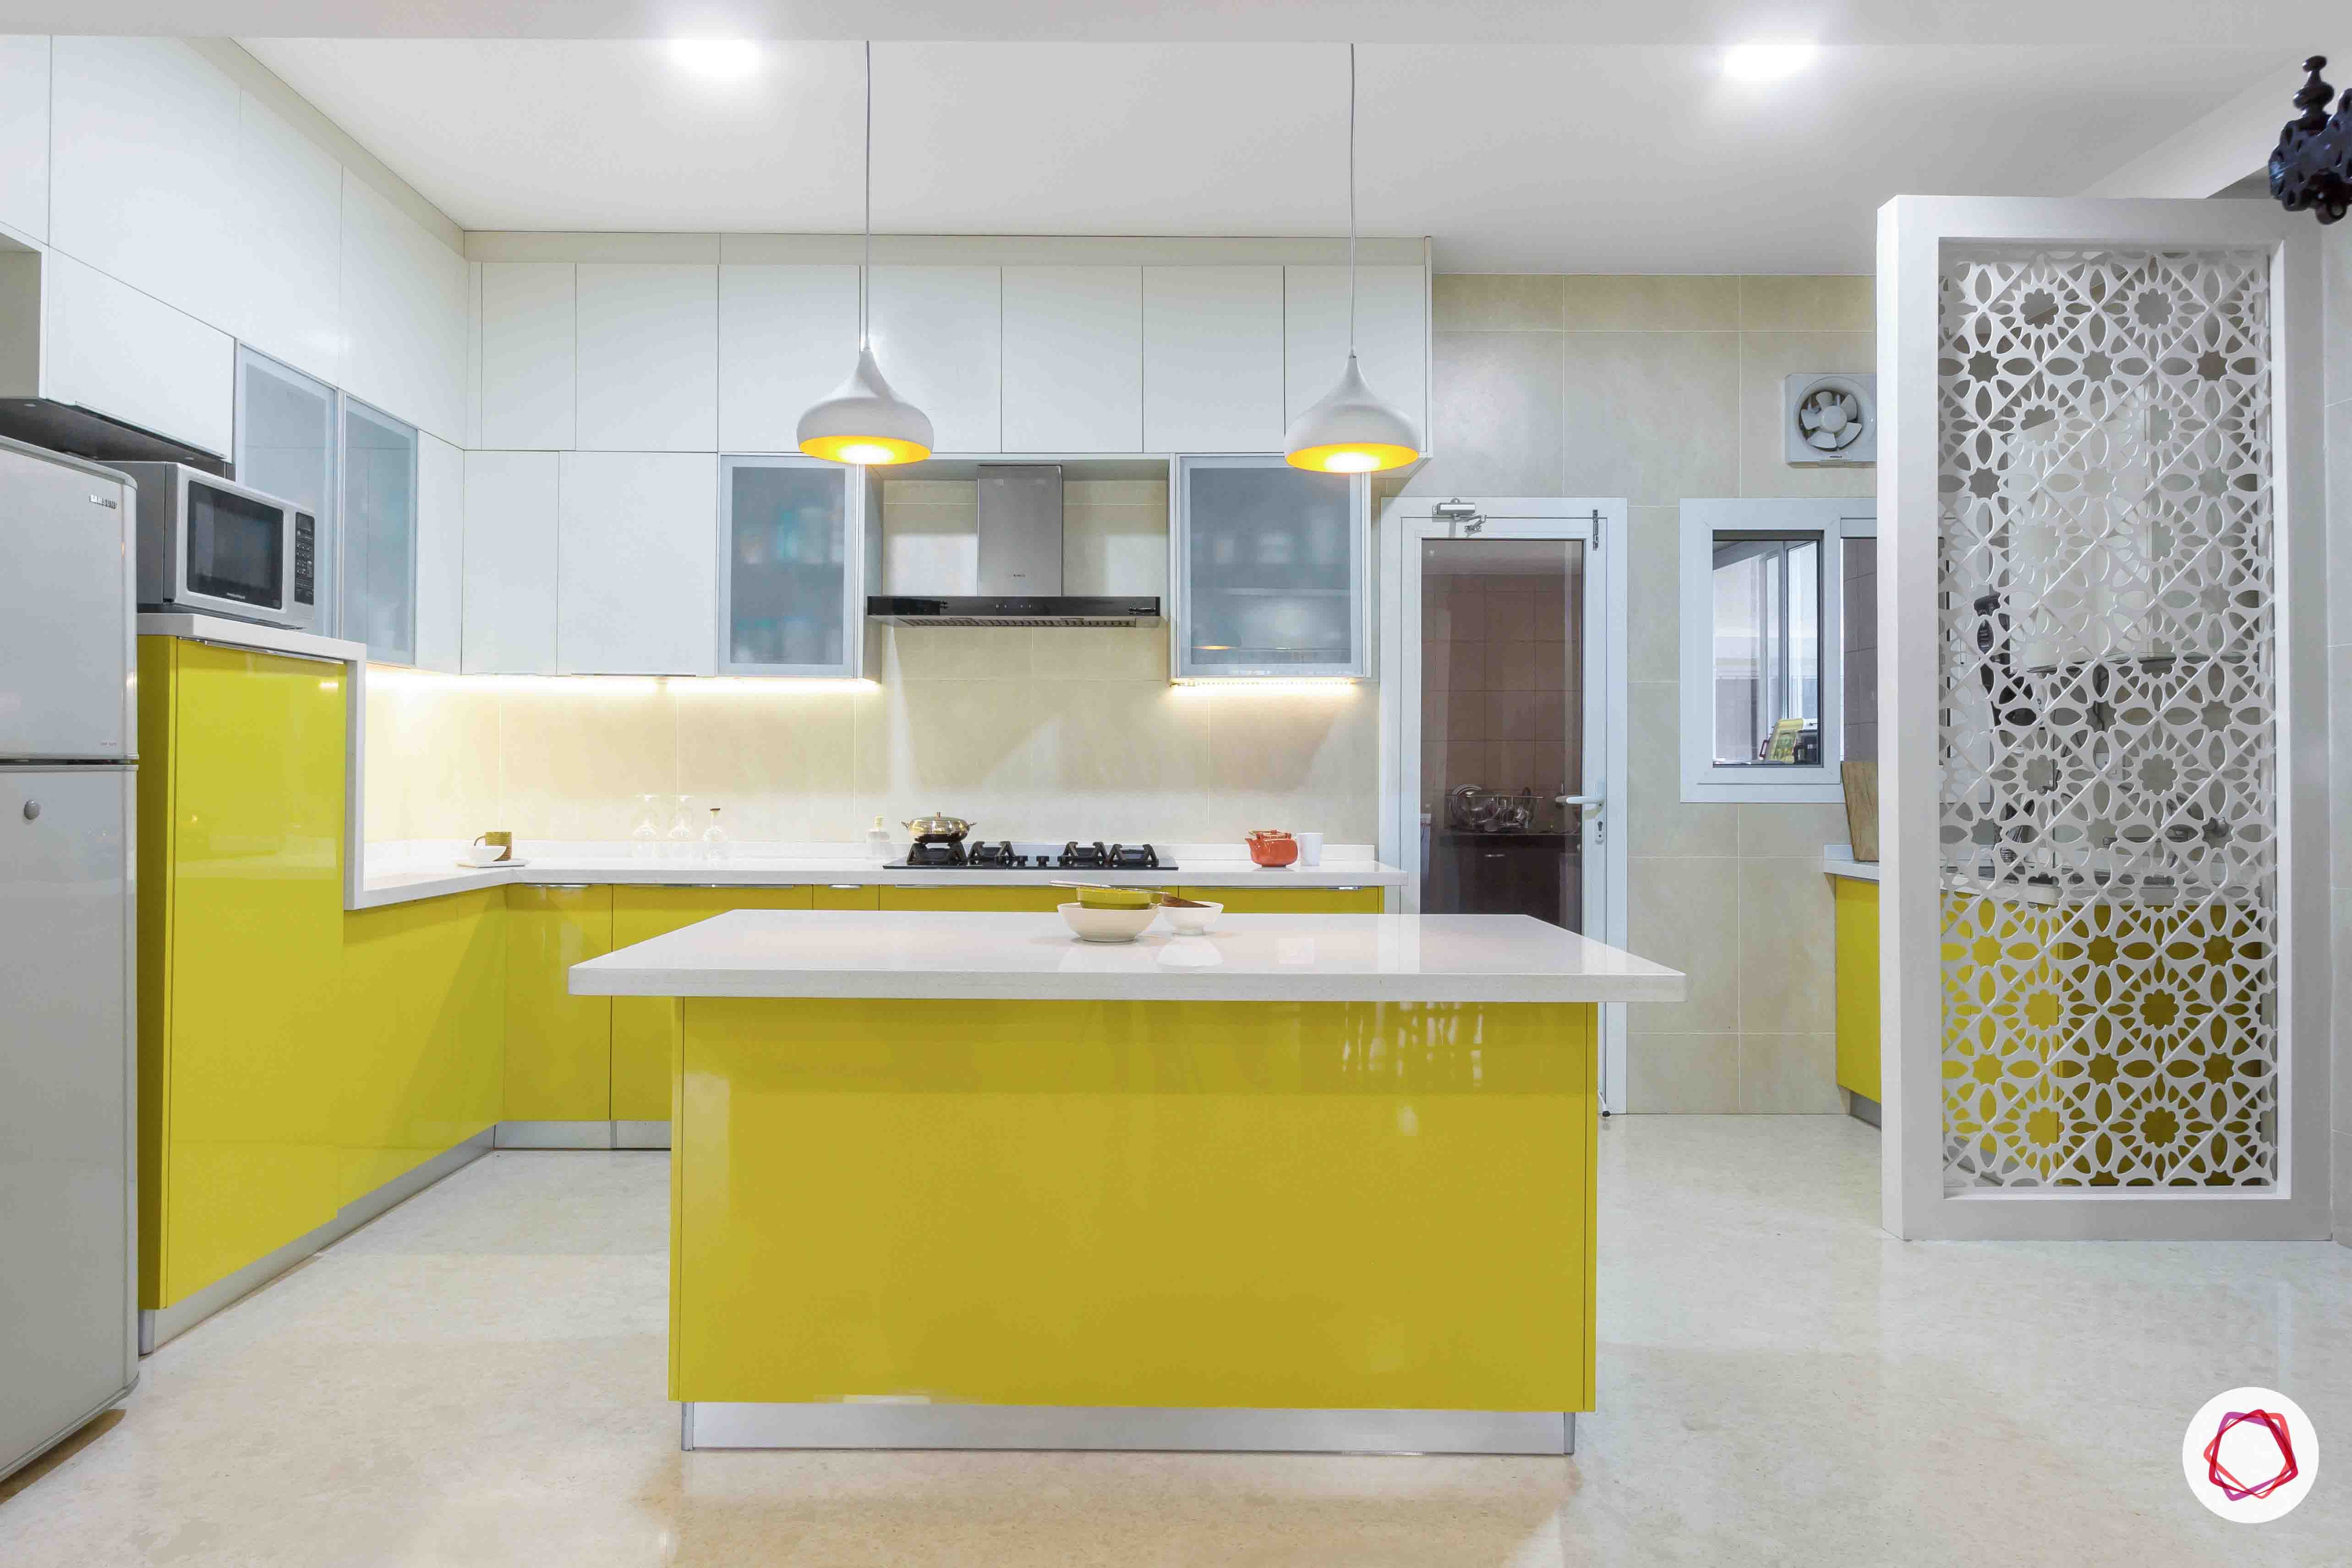 kitchen-yellow-white-lights-jali-cabinets-close-storage-frosted-glass-white-tiles